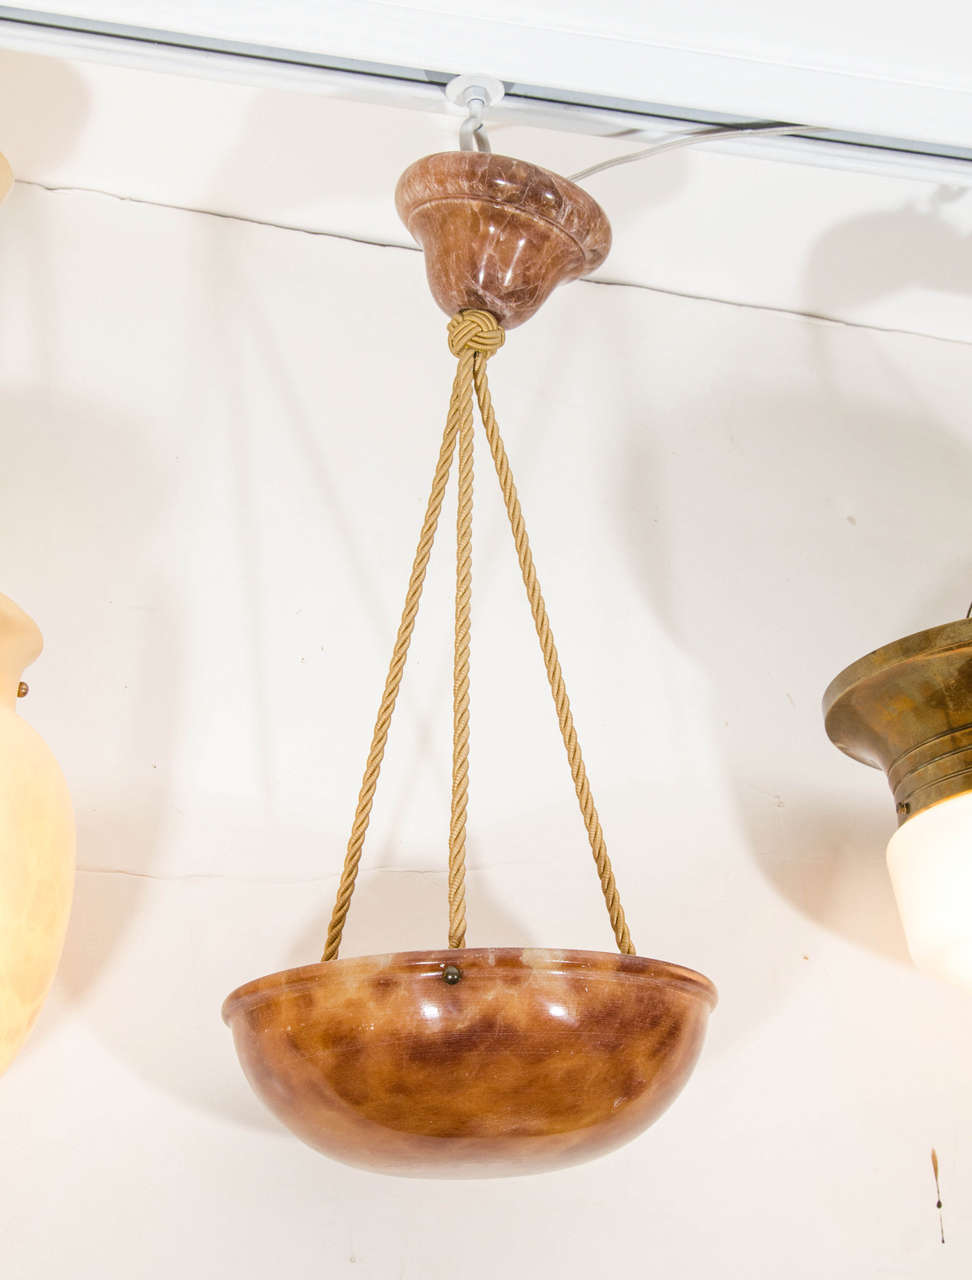 A Classic shape, the tortoise-toned alabaster glows from its satiny finish and its one 60 watt equivalent LED bulb. Recently rewired with three electrified ropes, the fixture features a matching alabaster canopy.

Custom rewiring to your specified